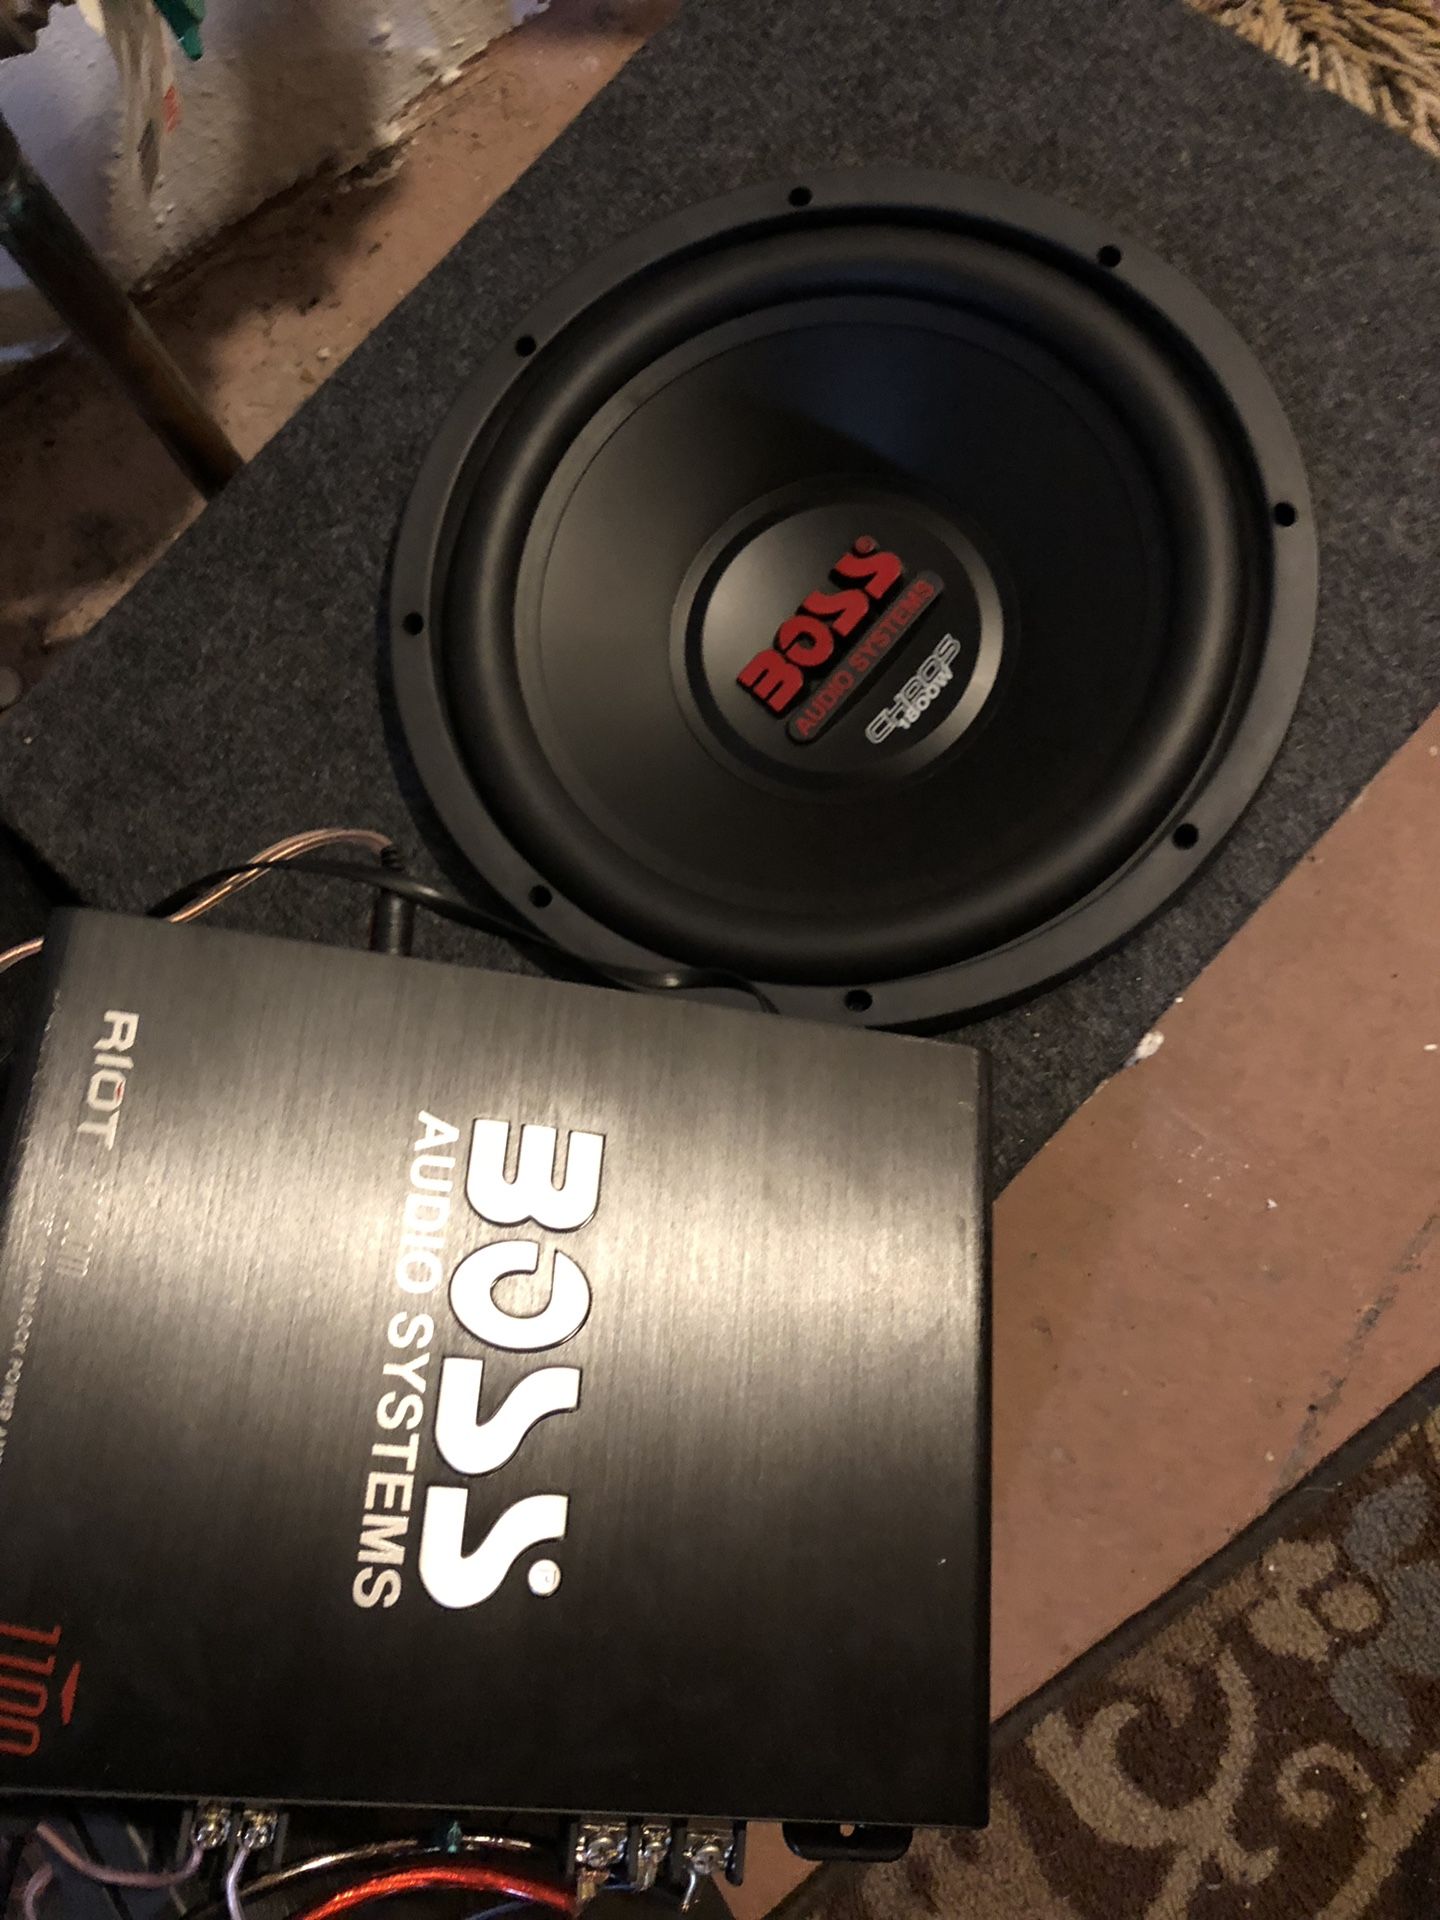 Boss subwoofer and amp